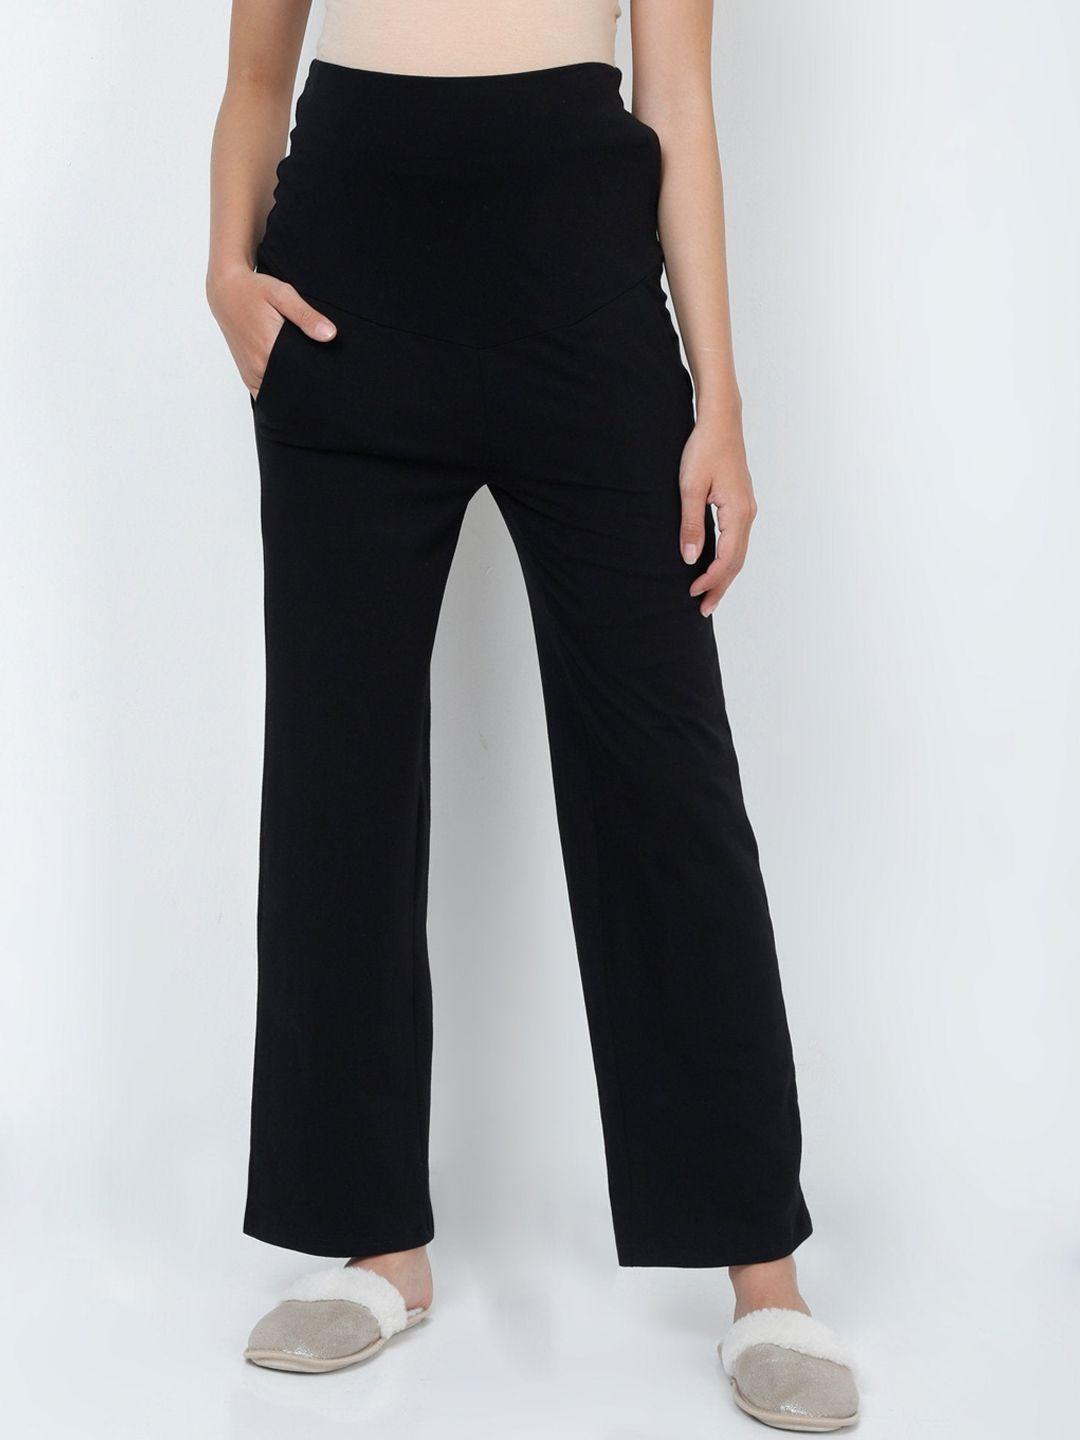 the mom store women black solid comfy maternity track pants